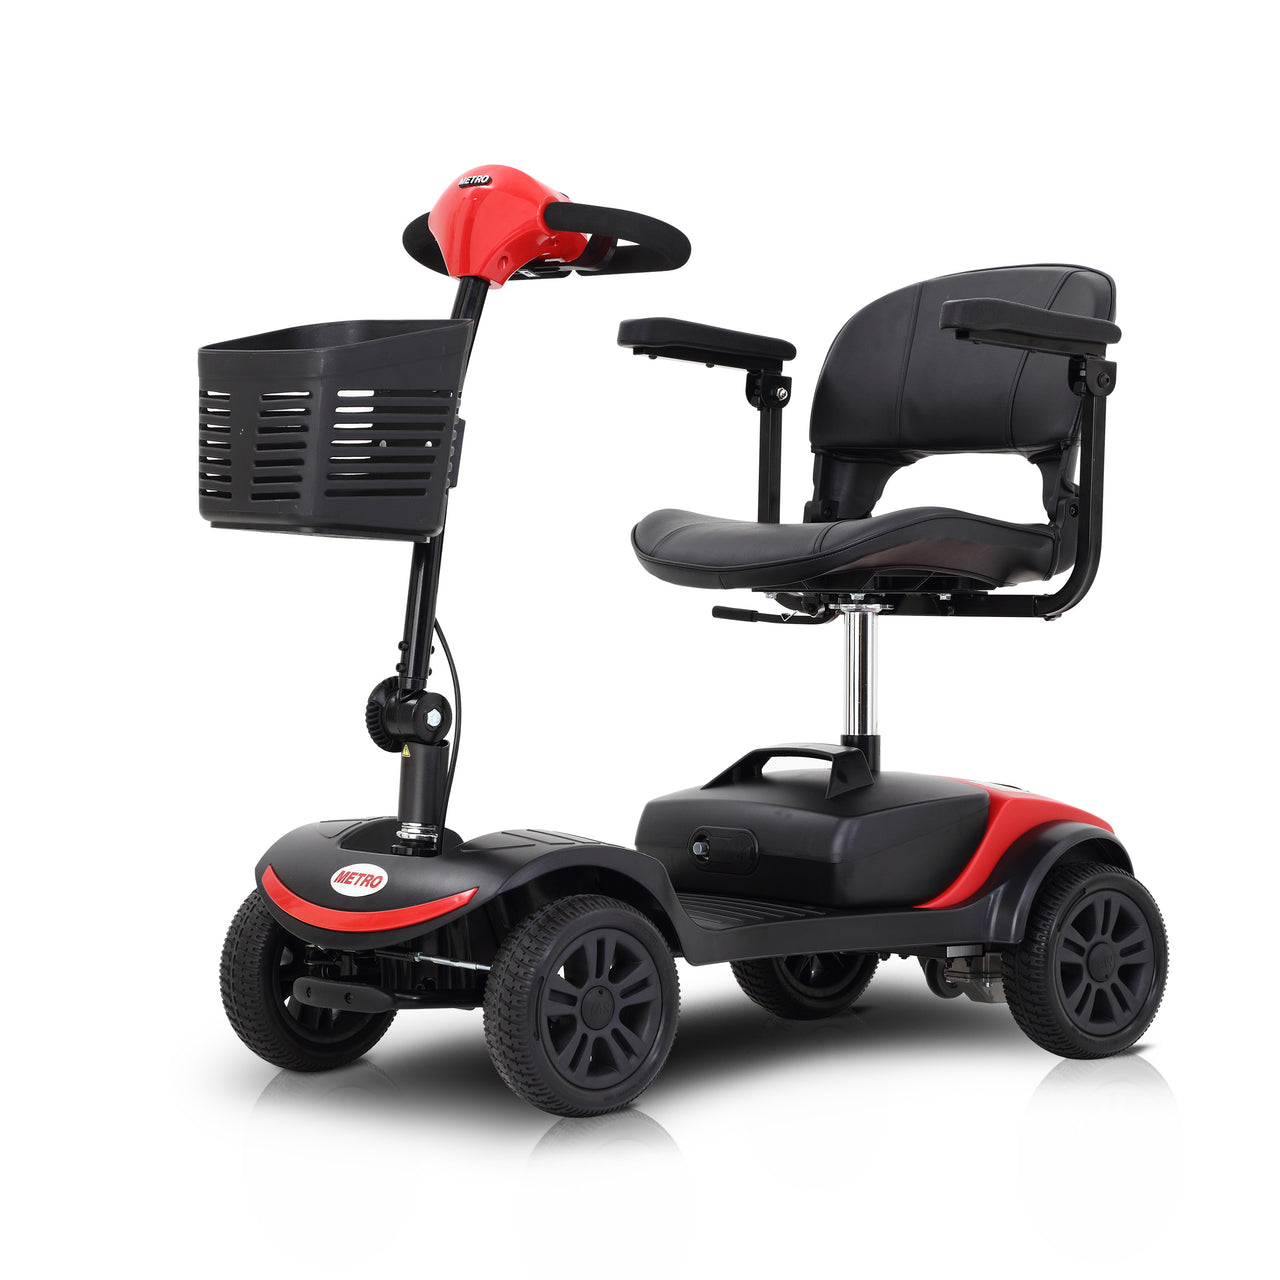 [NO LED LIGHT] Compact Mobility Scooter--Frosted Red